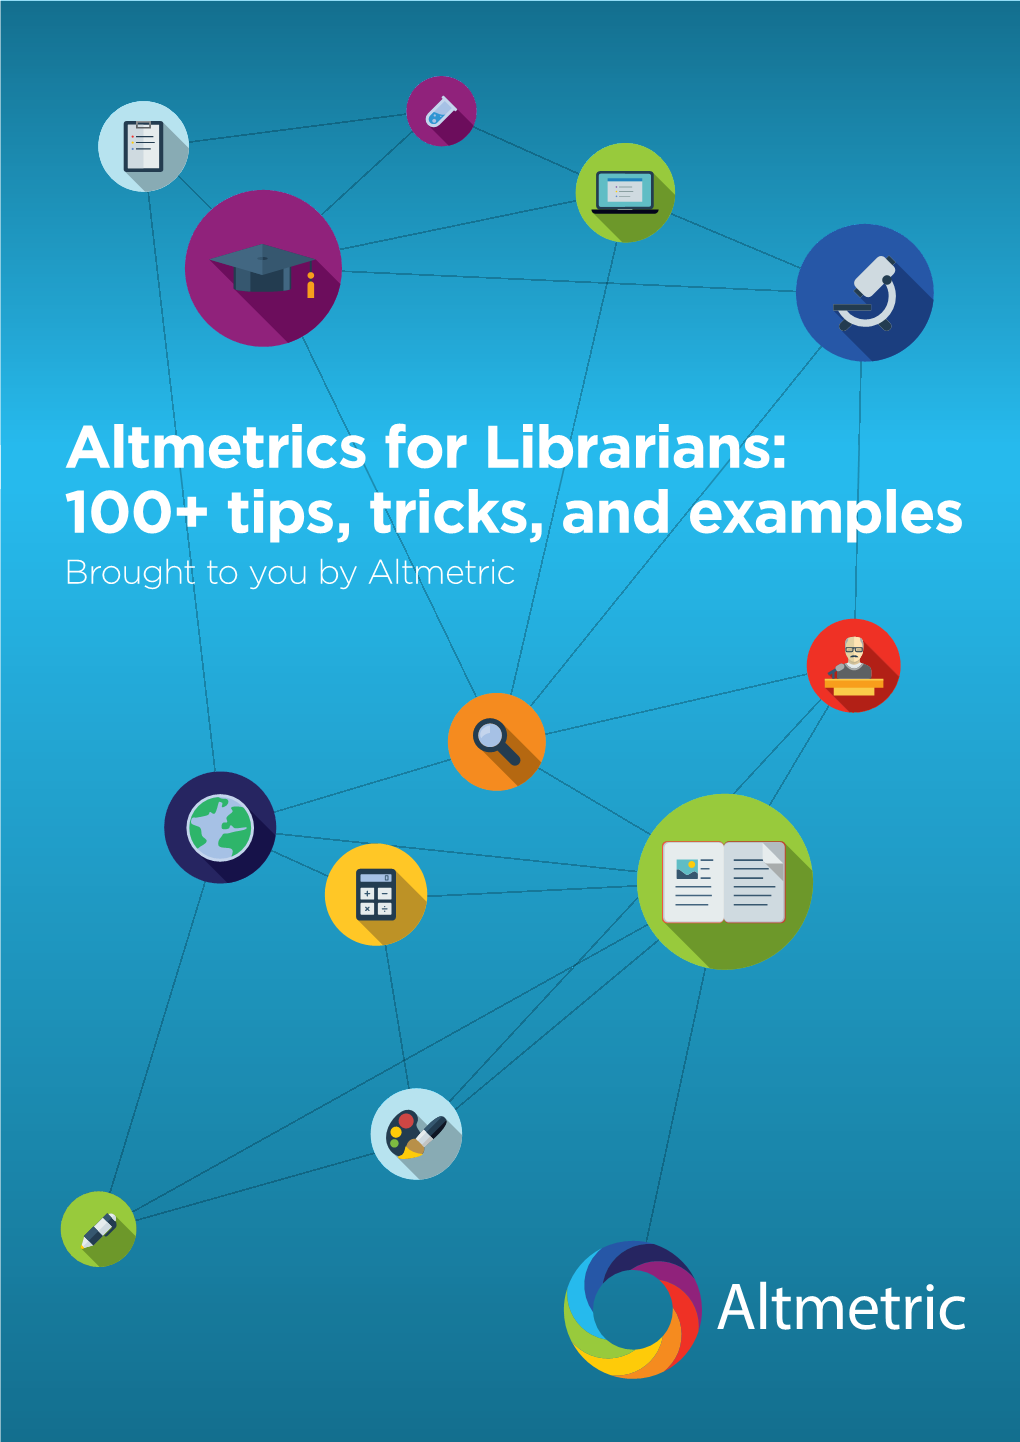 Altmetrics for Librarians: 100+ Tips, Tricks, and Examples Brought to You by Altmetric Contents